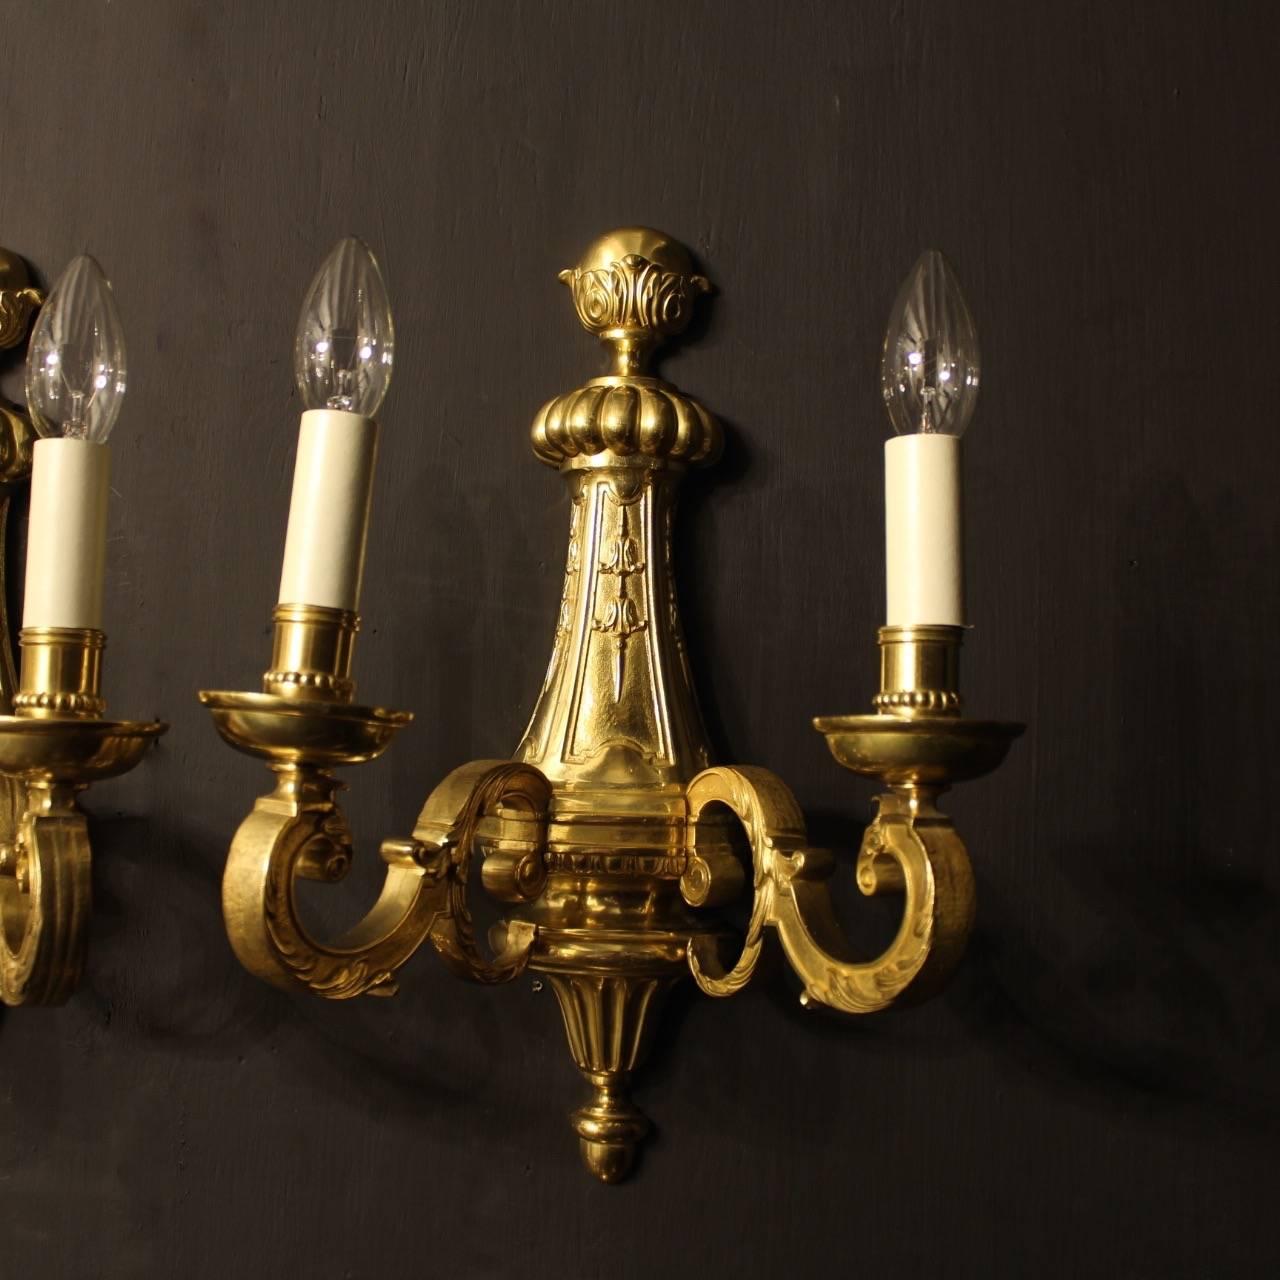 A set of six French bronze twin branch antique wall lights in the Louis XIV taste, the scrolling leaf square gauge scrolling arms with circular bobeche drip pans and millgrain candle sconces issuing from a foliate moulded backplate with decorative